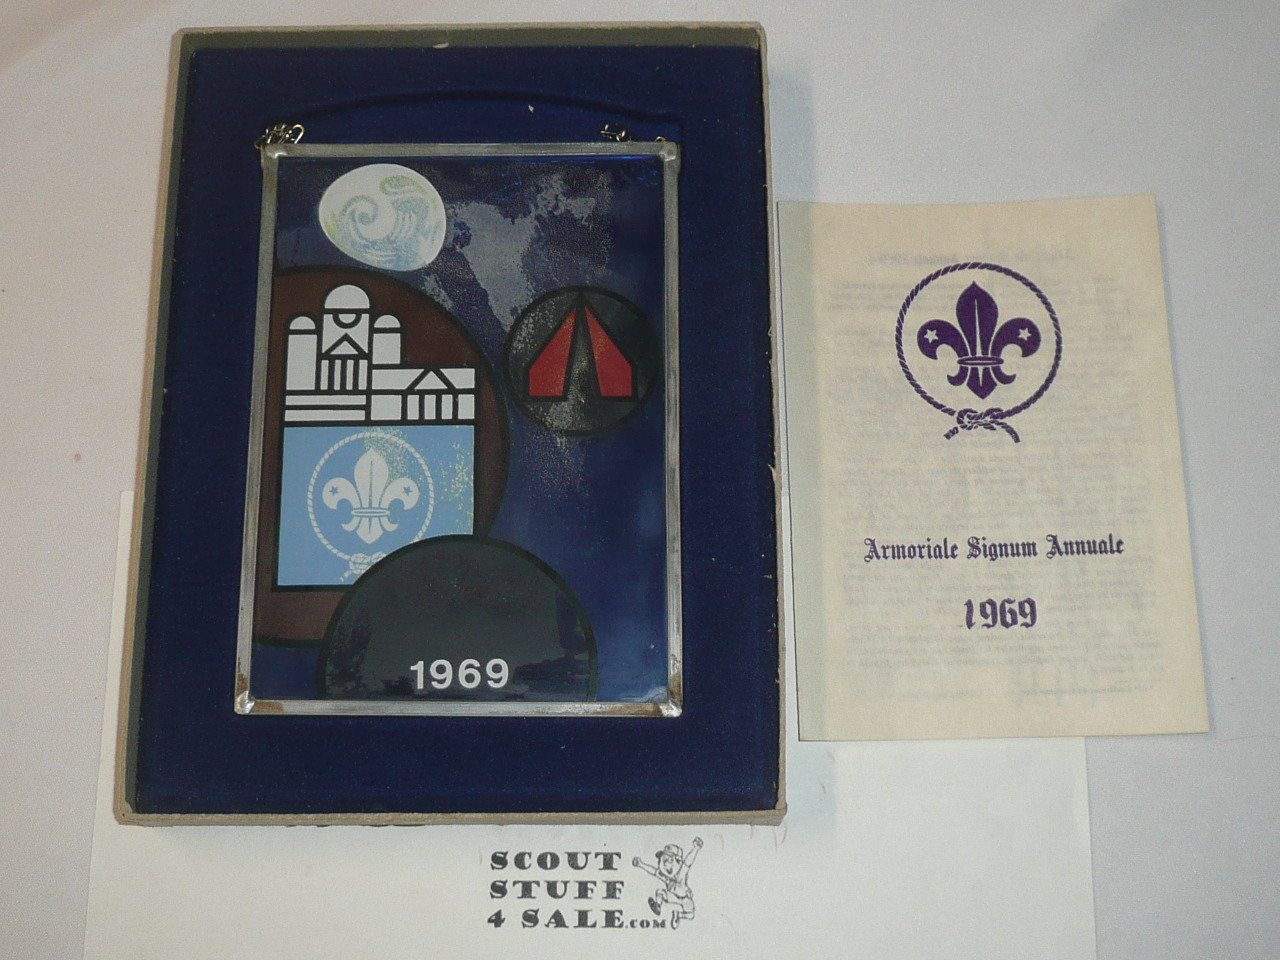 1969 World Scout Organization Stained Glass Tableu with Paperwork, 5" x 6.5"